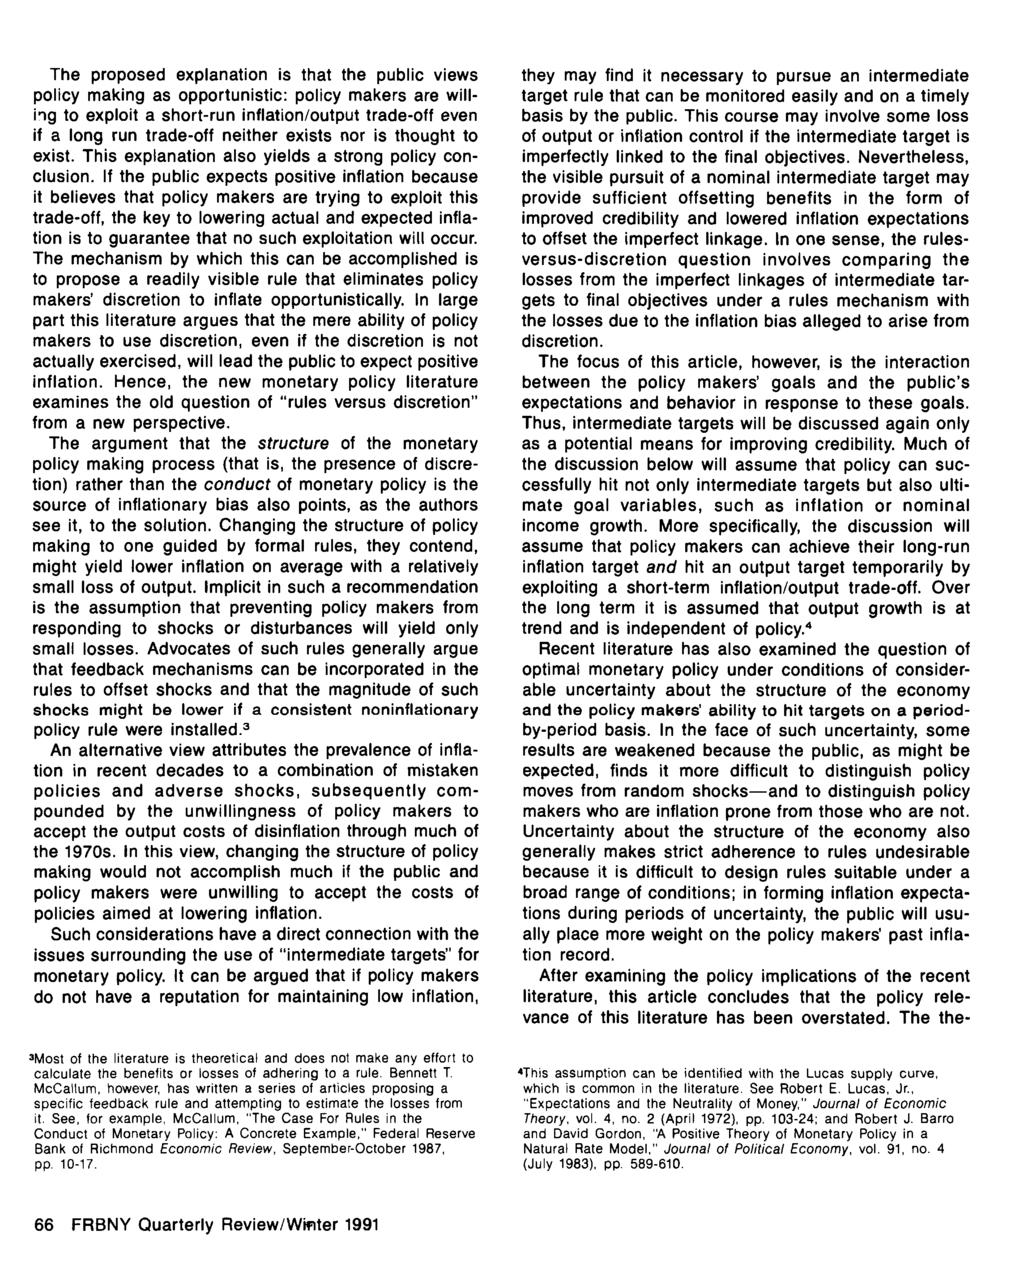 66 FRBNY Quarterly Review/Wifiter 1991 Winter 1990-1991 The proposed explanation is that the public views policy making as opportunistic: policy makers are willing to exploit a short-run